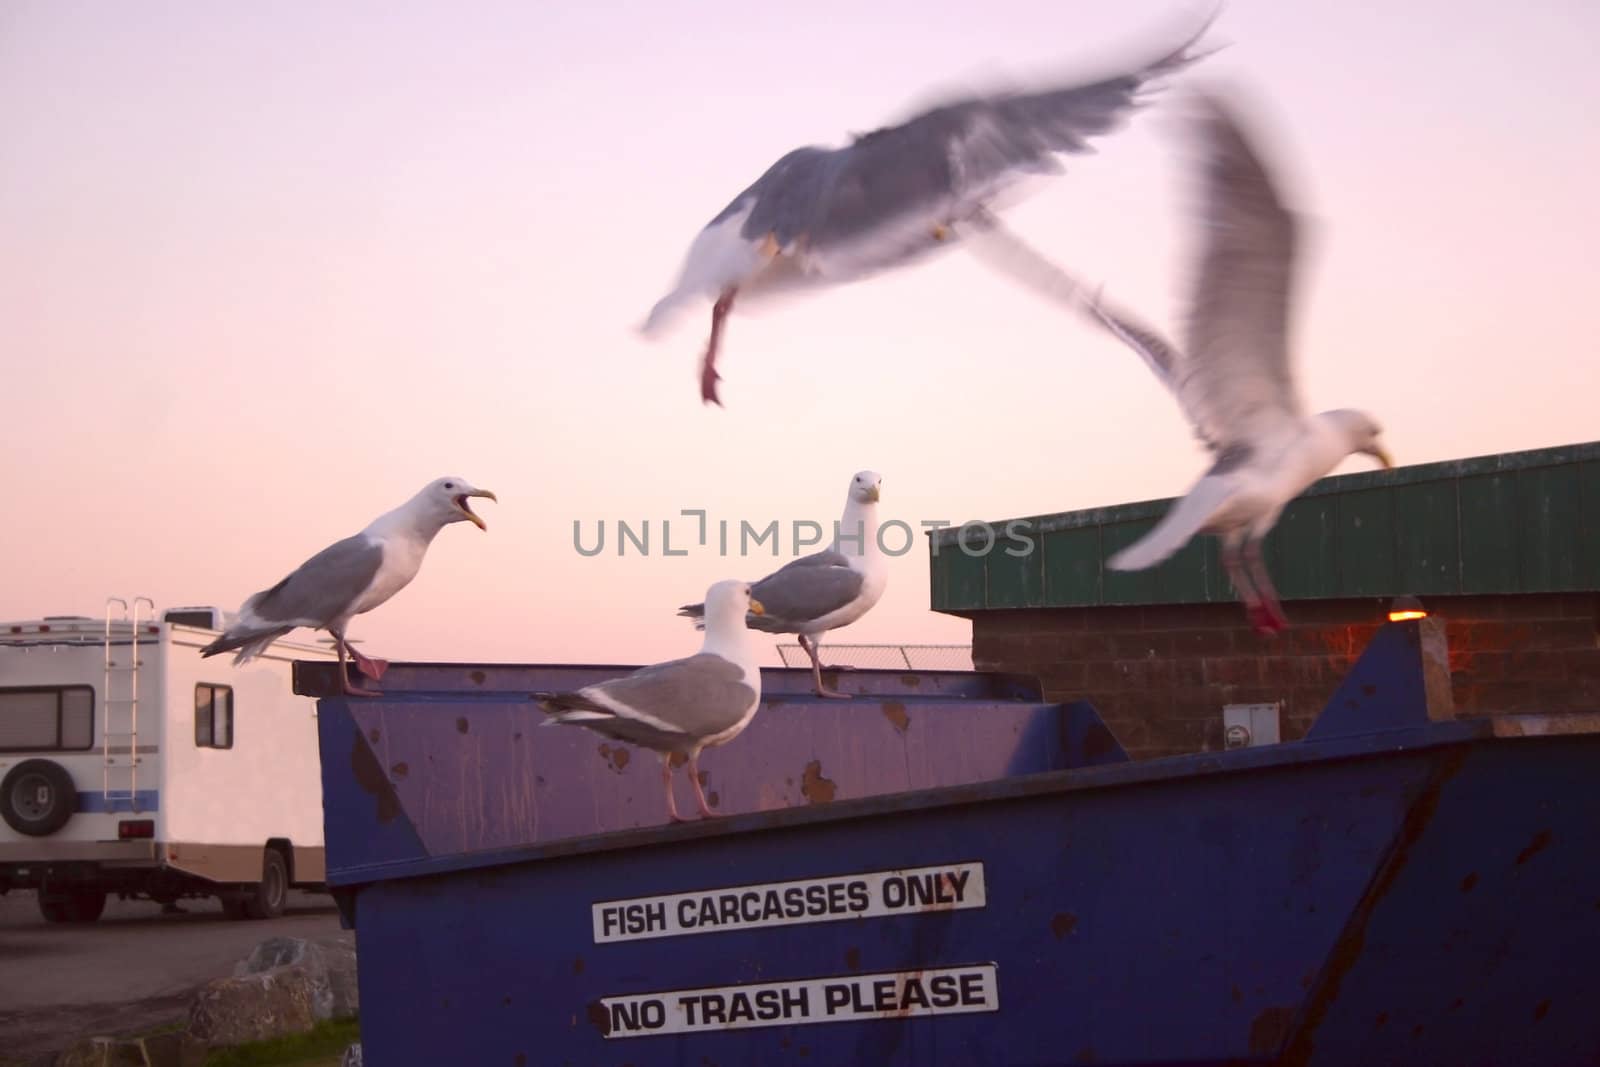 Turned pink by the intense northern summer sunset light, Glaucous-winged Gulls (Larus glaucescens) defend their territories while scavenging for fish cleaning offal tossed in a bin near the fishing hole on the spit in Homer, Alaska.